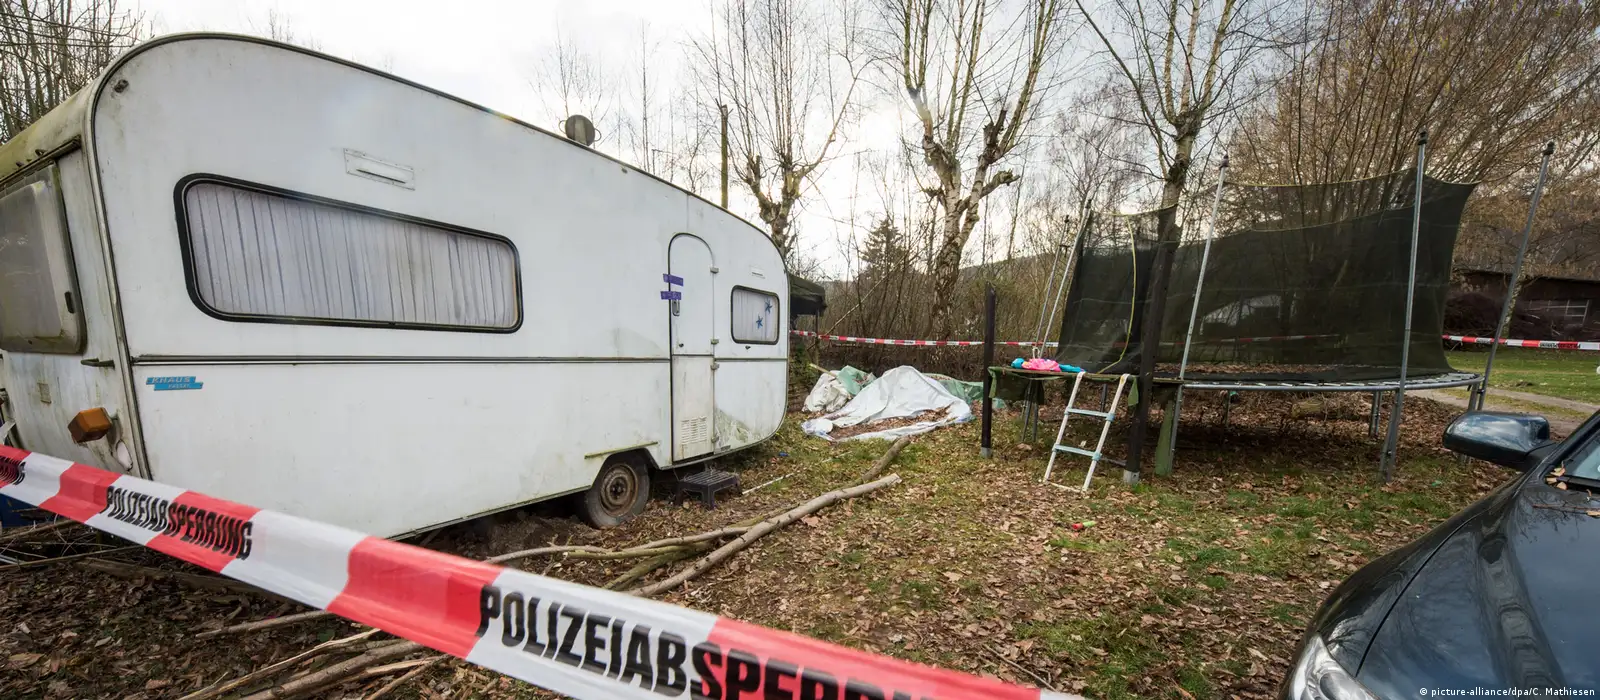 Ex Smallsexvideo - Child abuse at campsite: How authorities failed the victims â€“ DW â€“  09/05/2019